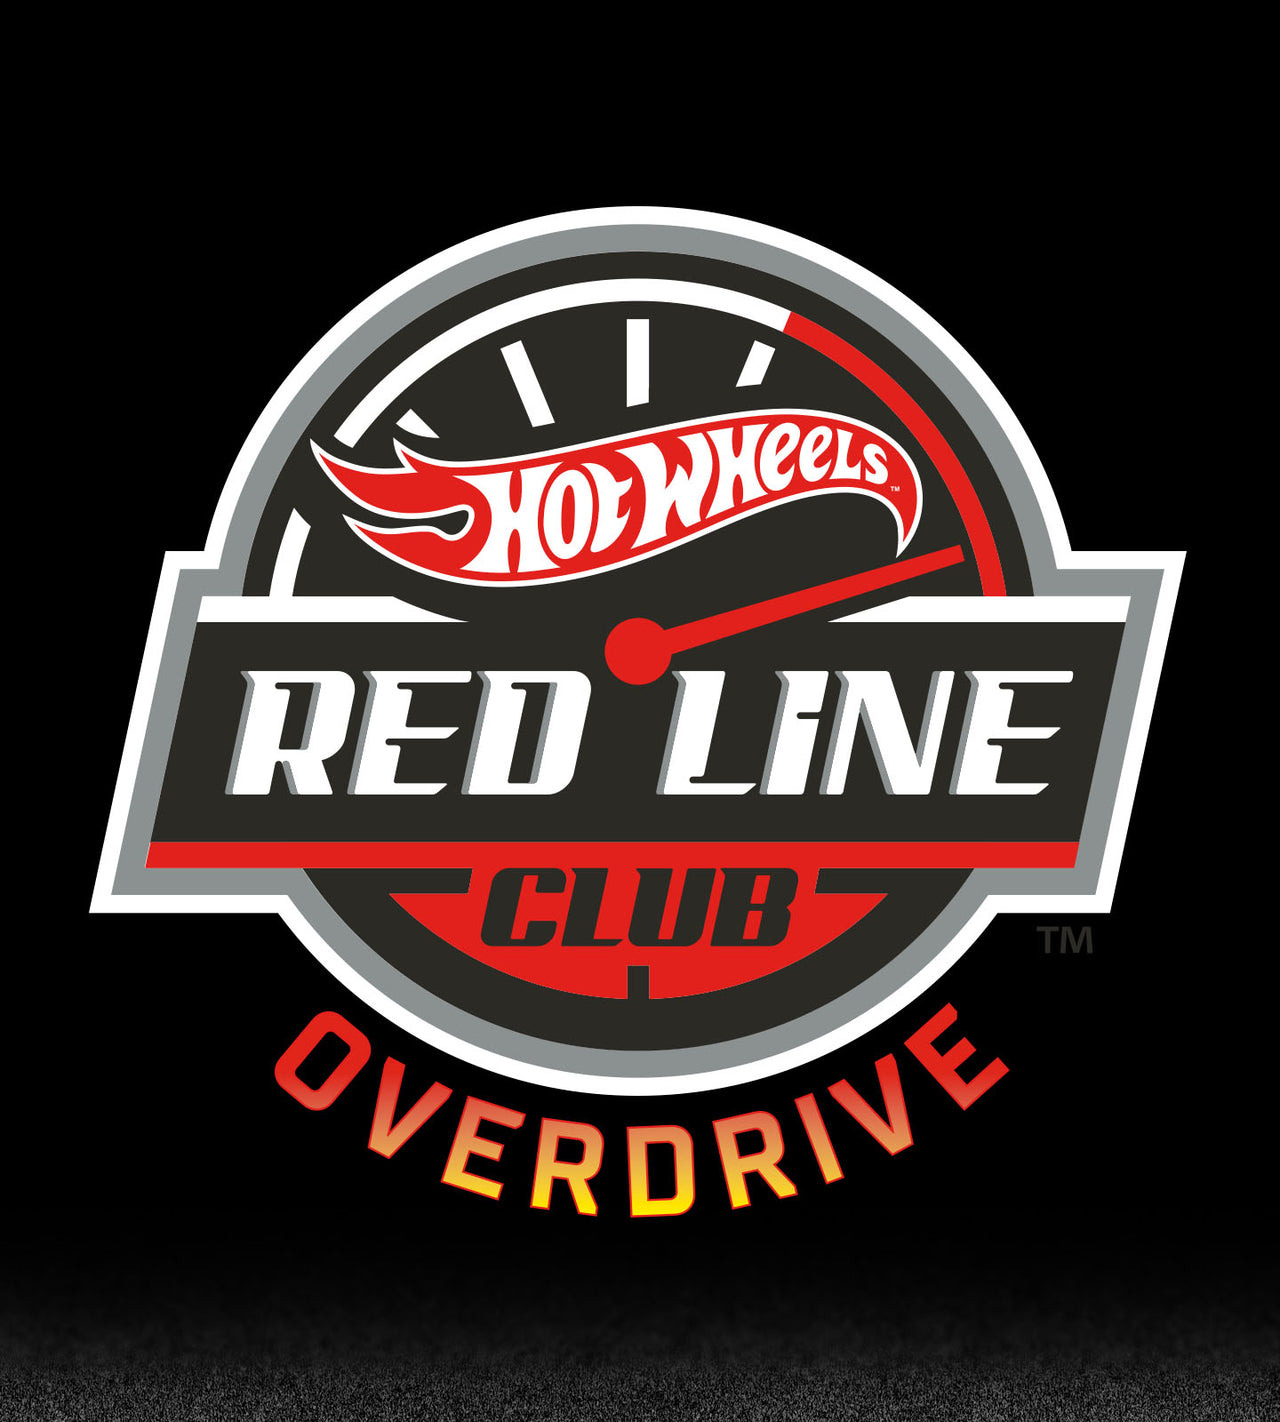 Hot Wheels Red Line Club Overdrive logo